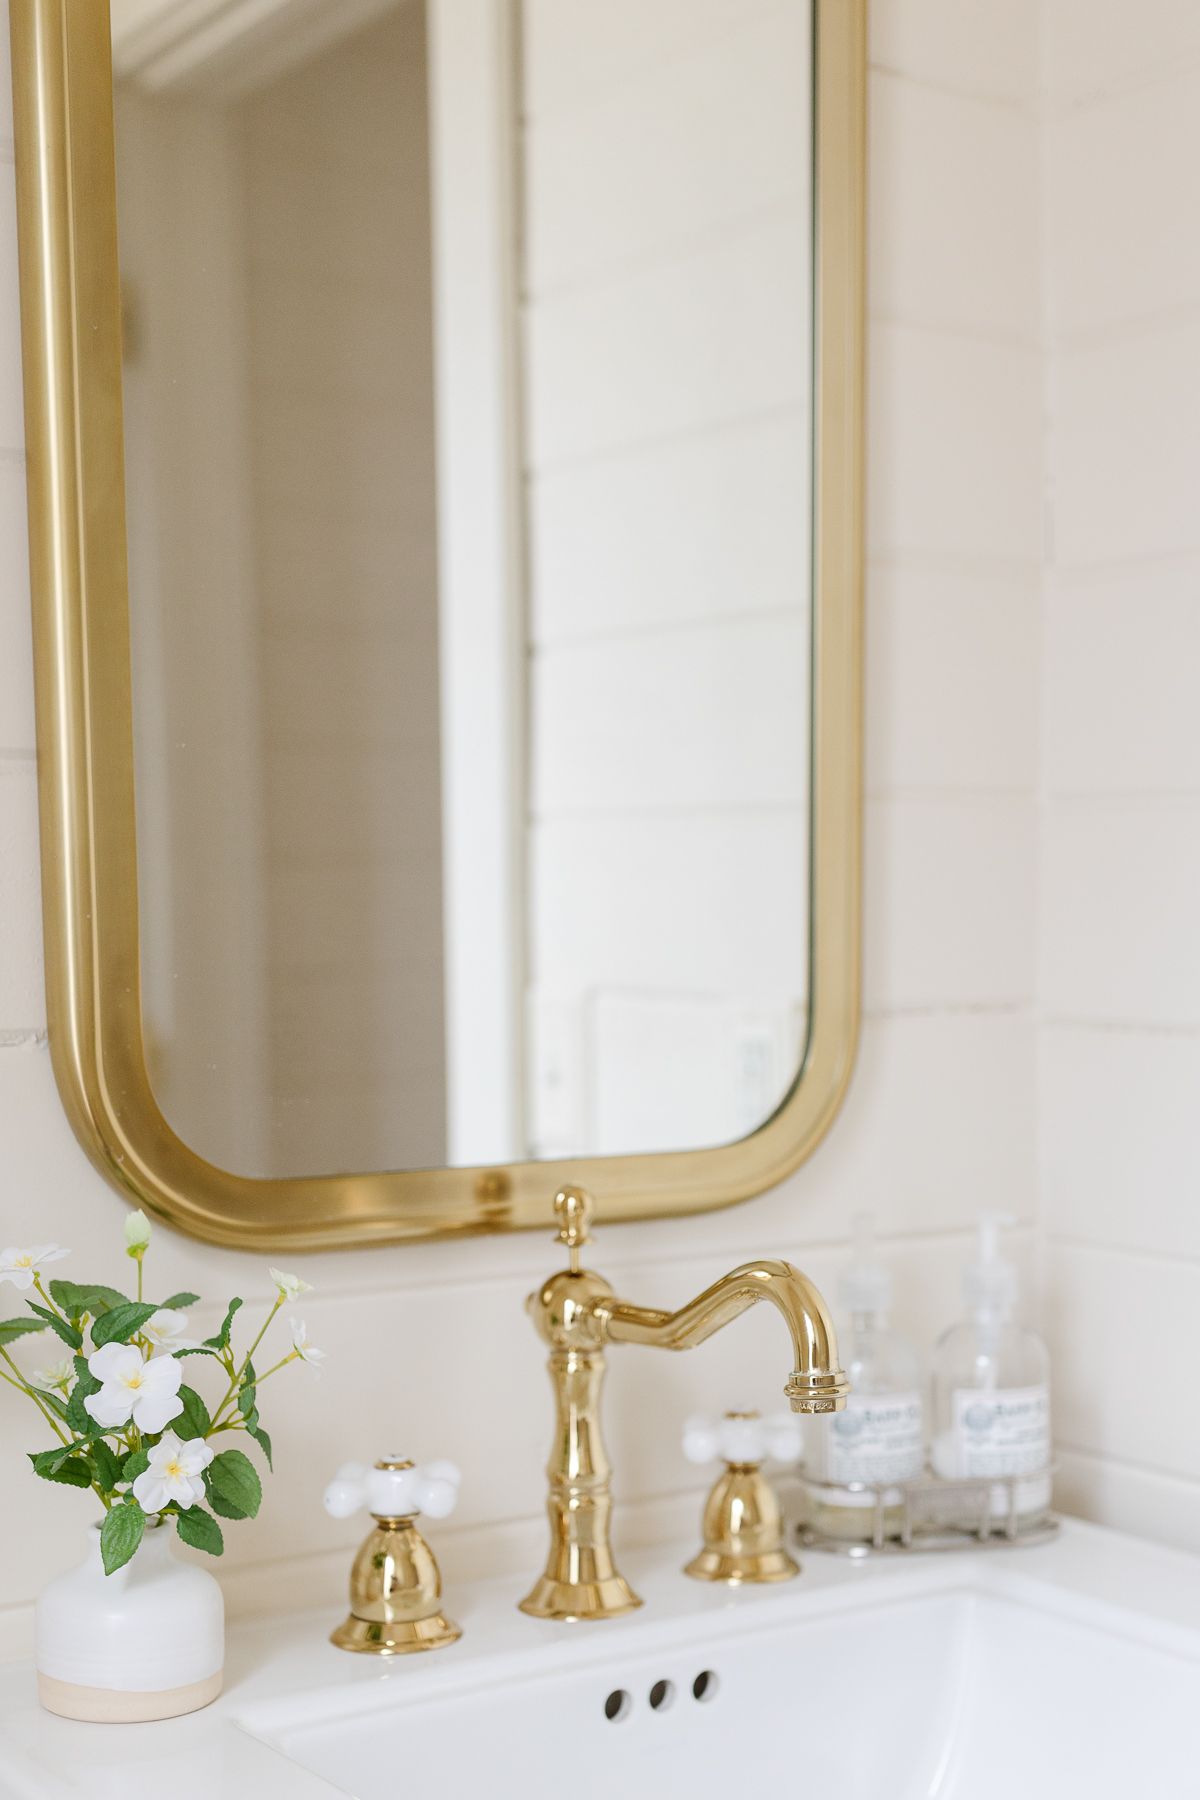 A cozy home with brass metals in a white bathroom